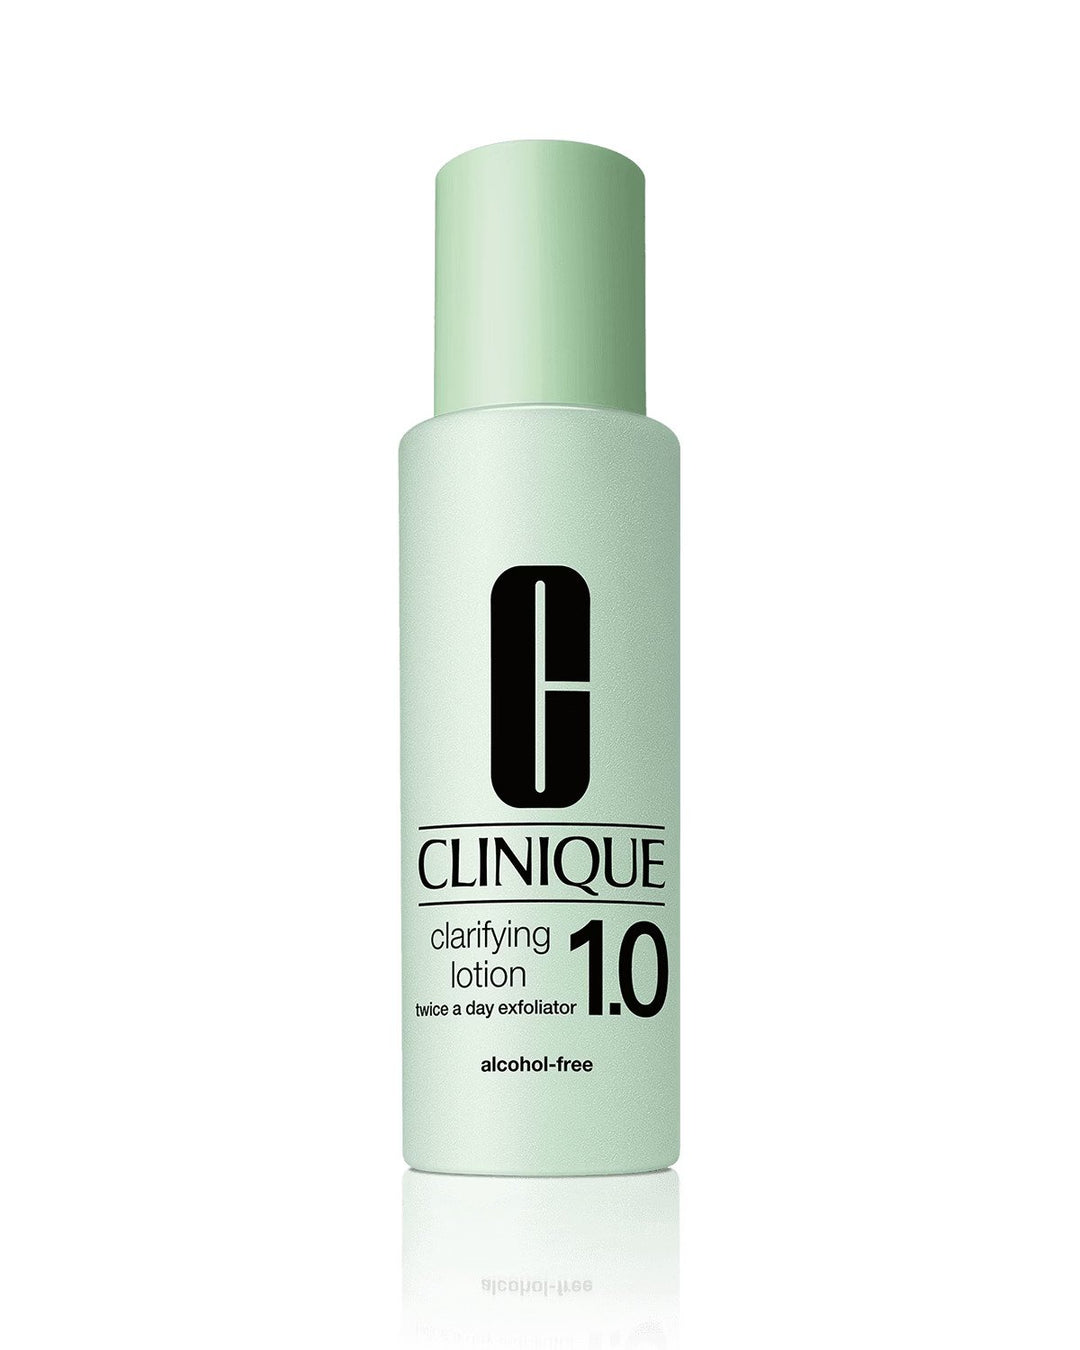 Shop The Latest Collection Of Clinique Clarifying Lotion 1.0 Twice A Day Exfoliator In Lebanon